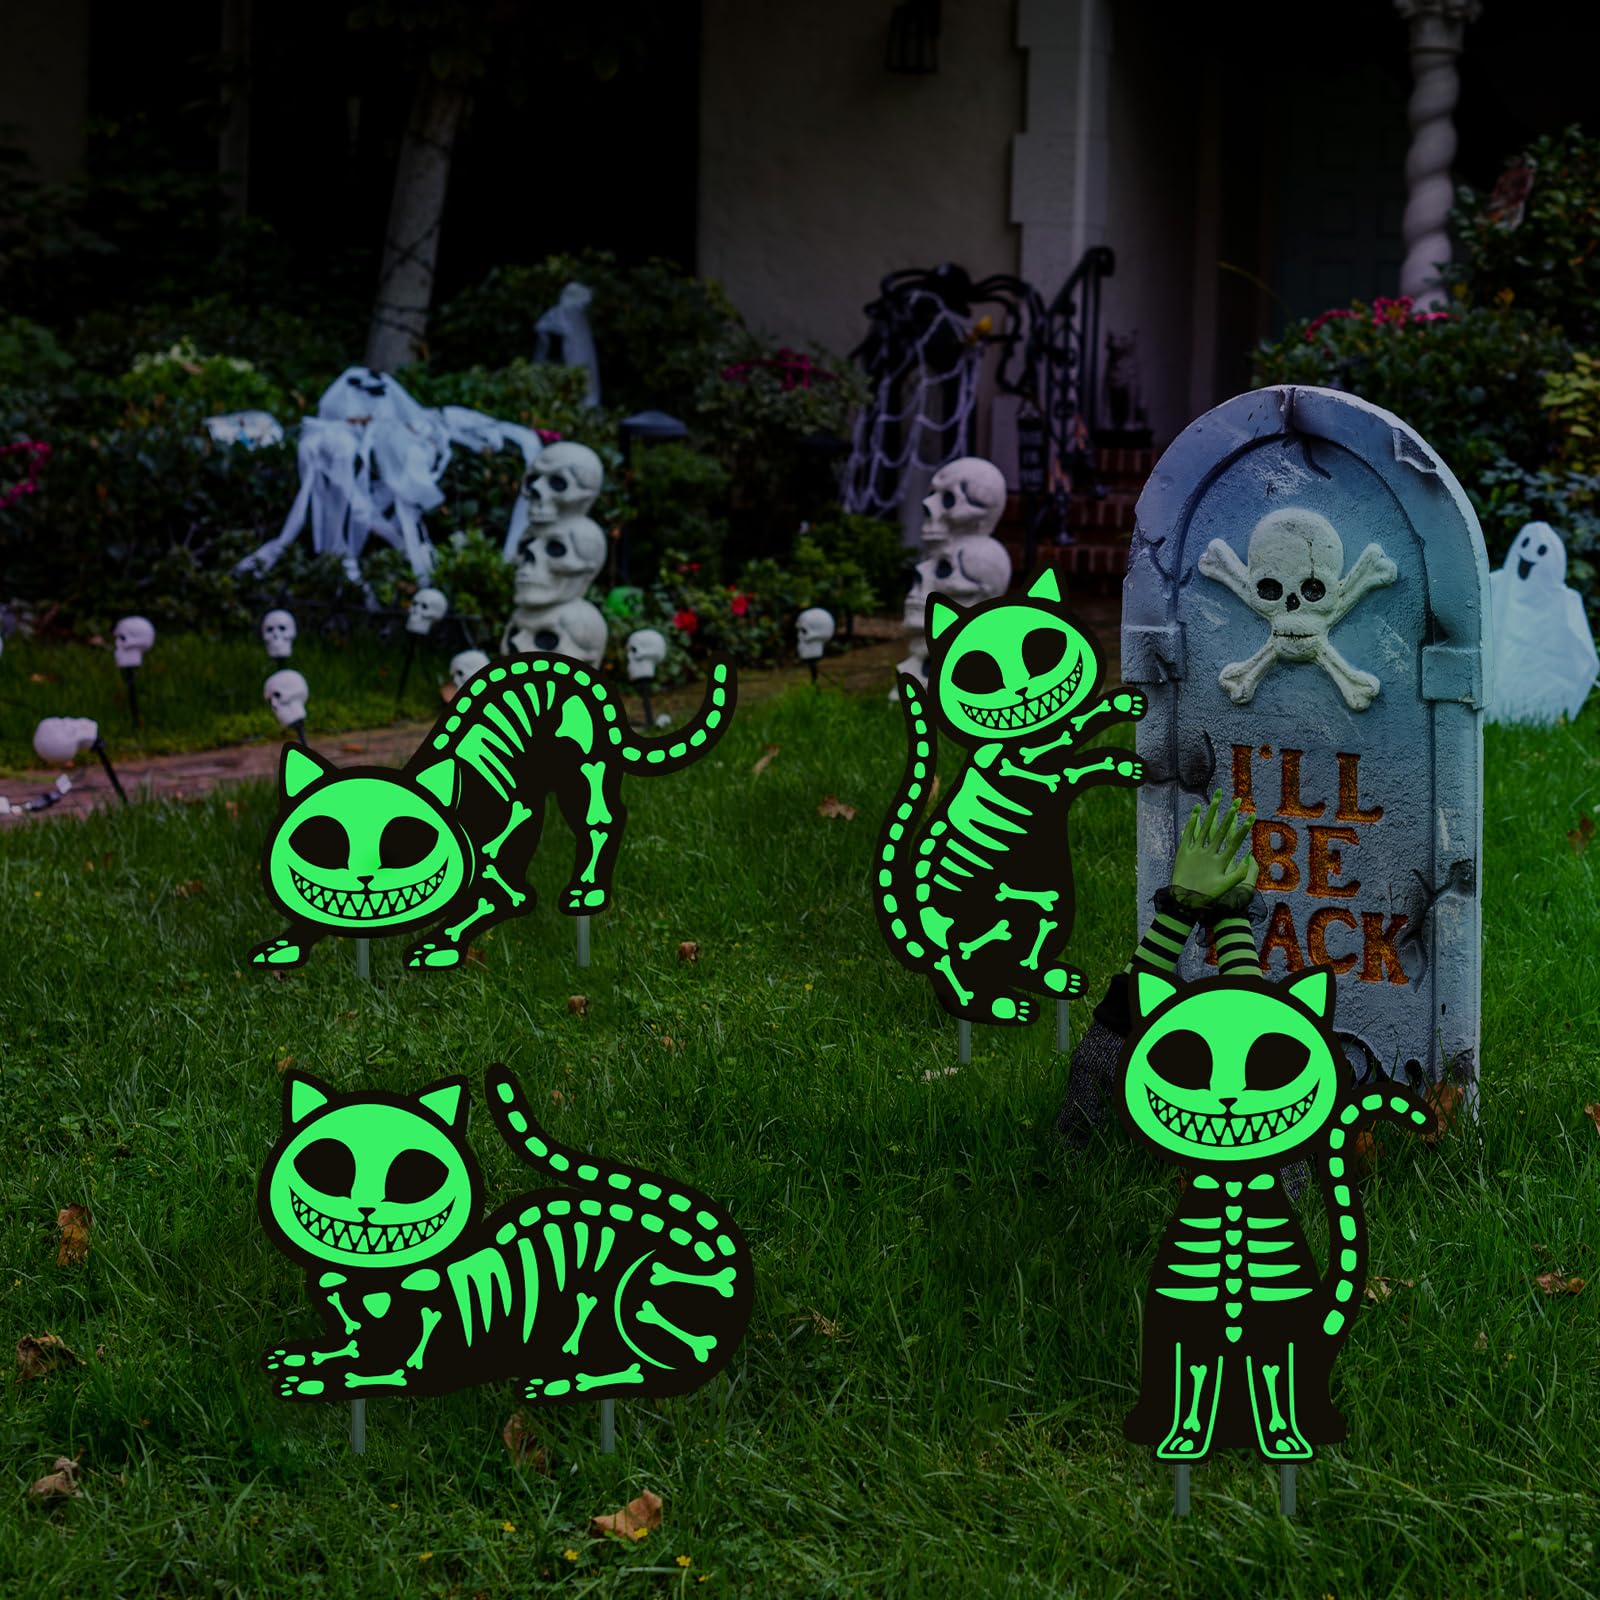 AUUABEARONN Halloween Decorations Outdoor, 4pcs Black Cat Deco Yard Signs with Stakes, Scary Glow in the Dark Skeleton Black Cat Lawn Signs, Waterproof Cat Decor for Halloween Party Lawn